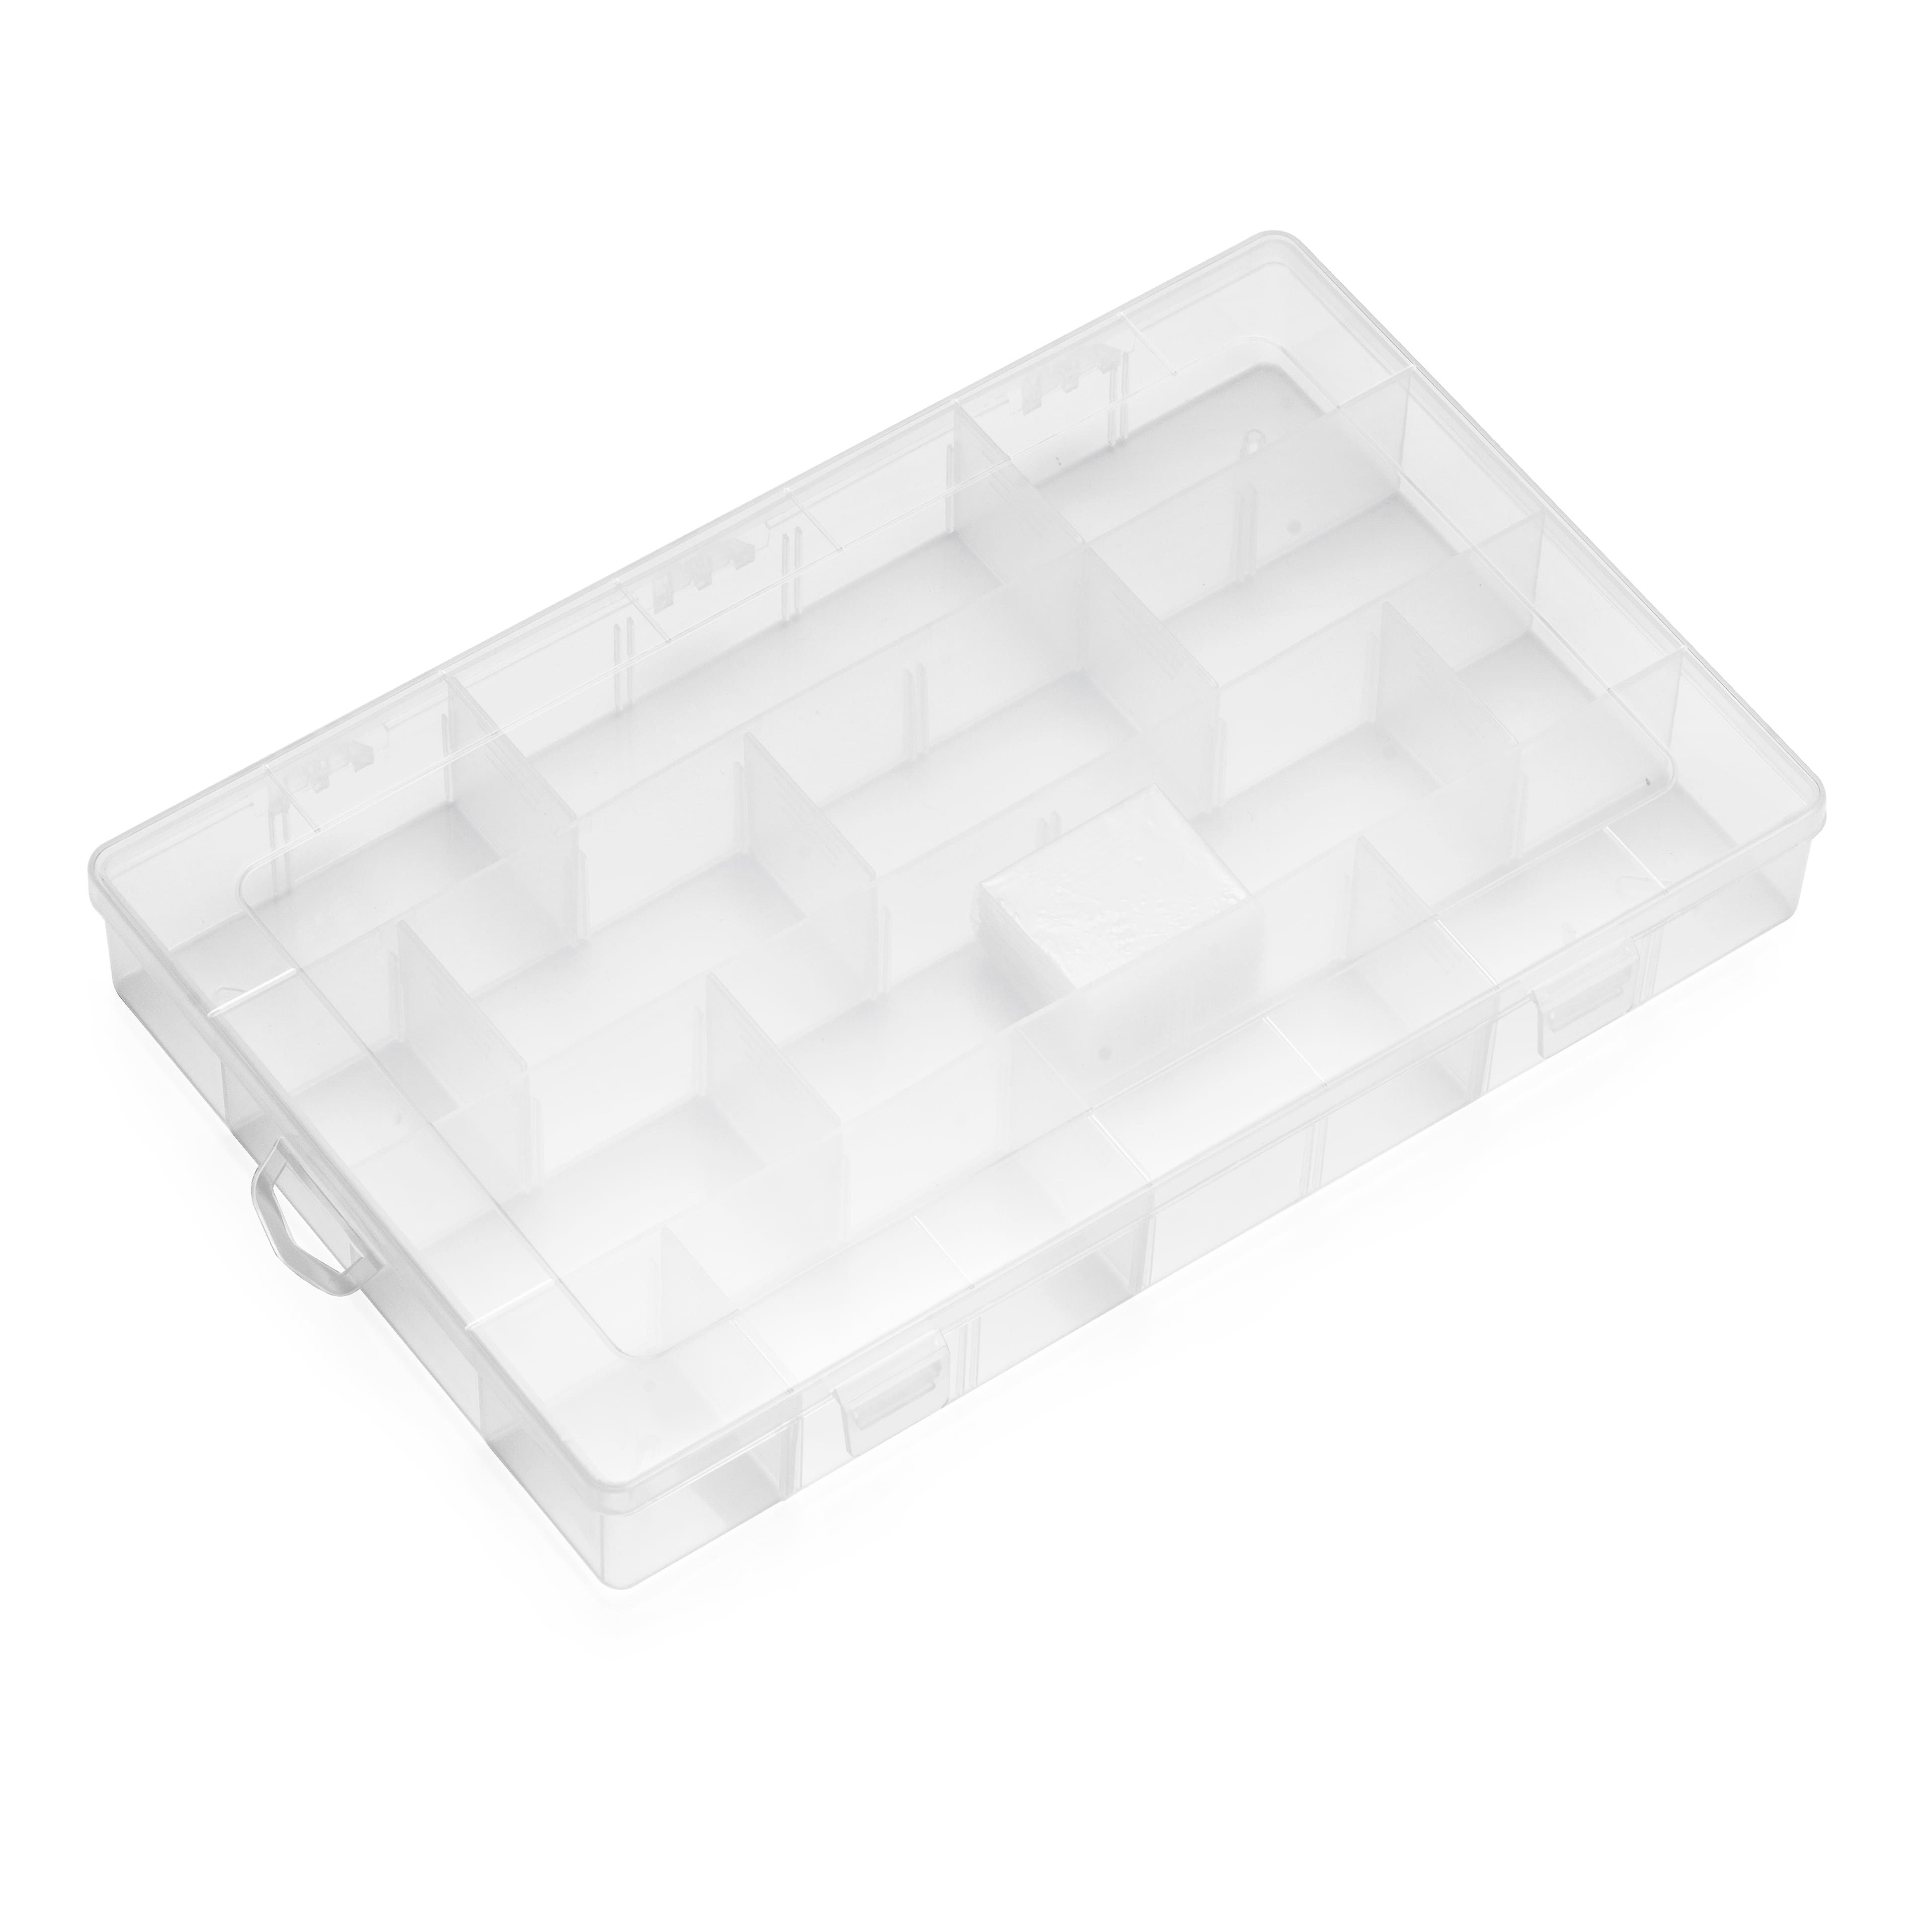 LMZM Storage Box Large Capacity Transparent Plastic All-purpose Face Cover Clear  Organizer Box for Home 